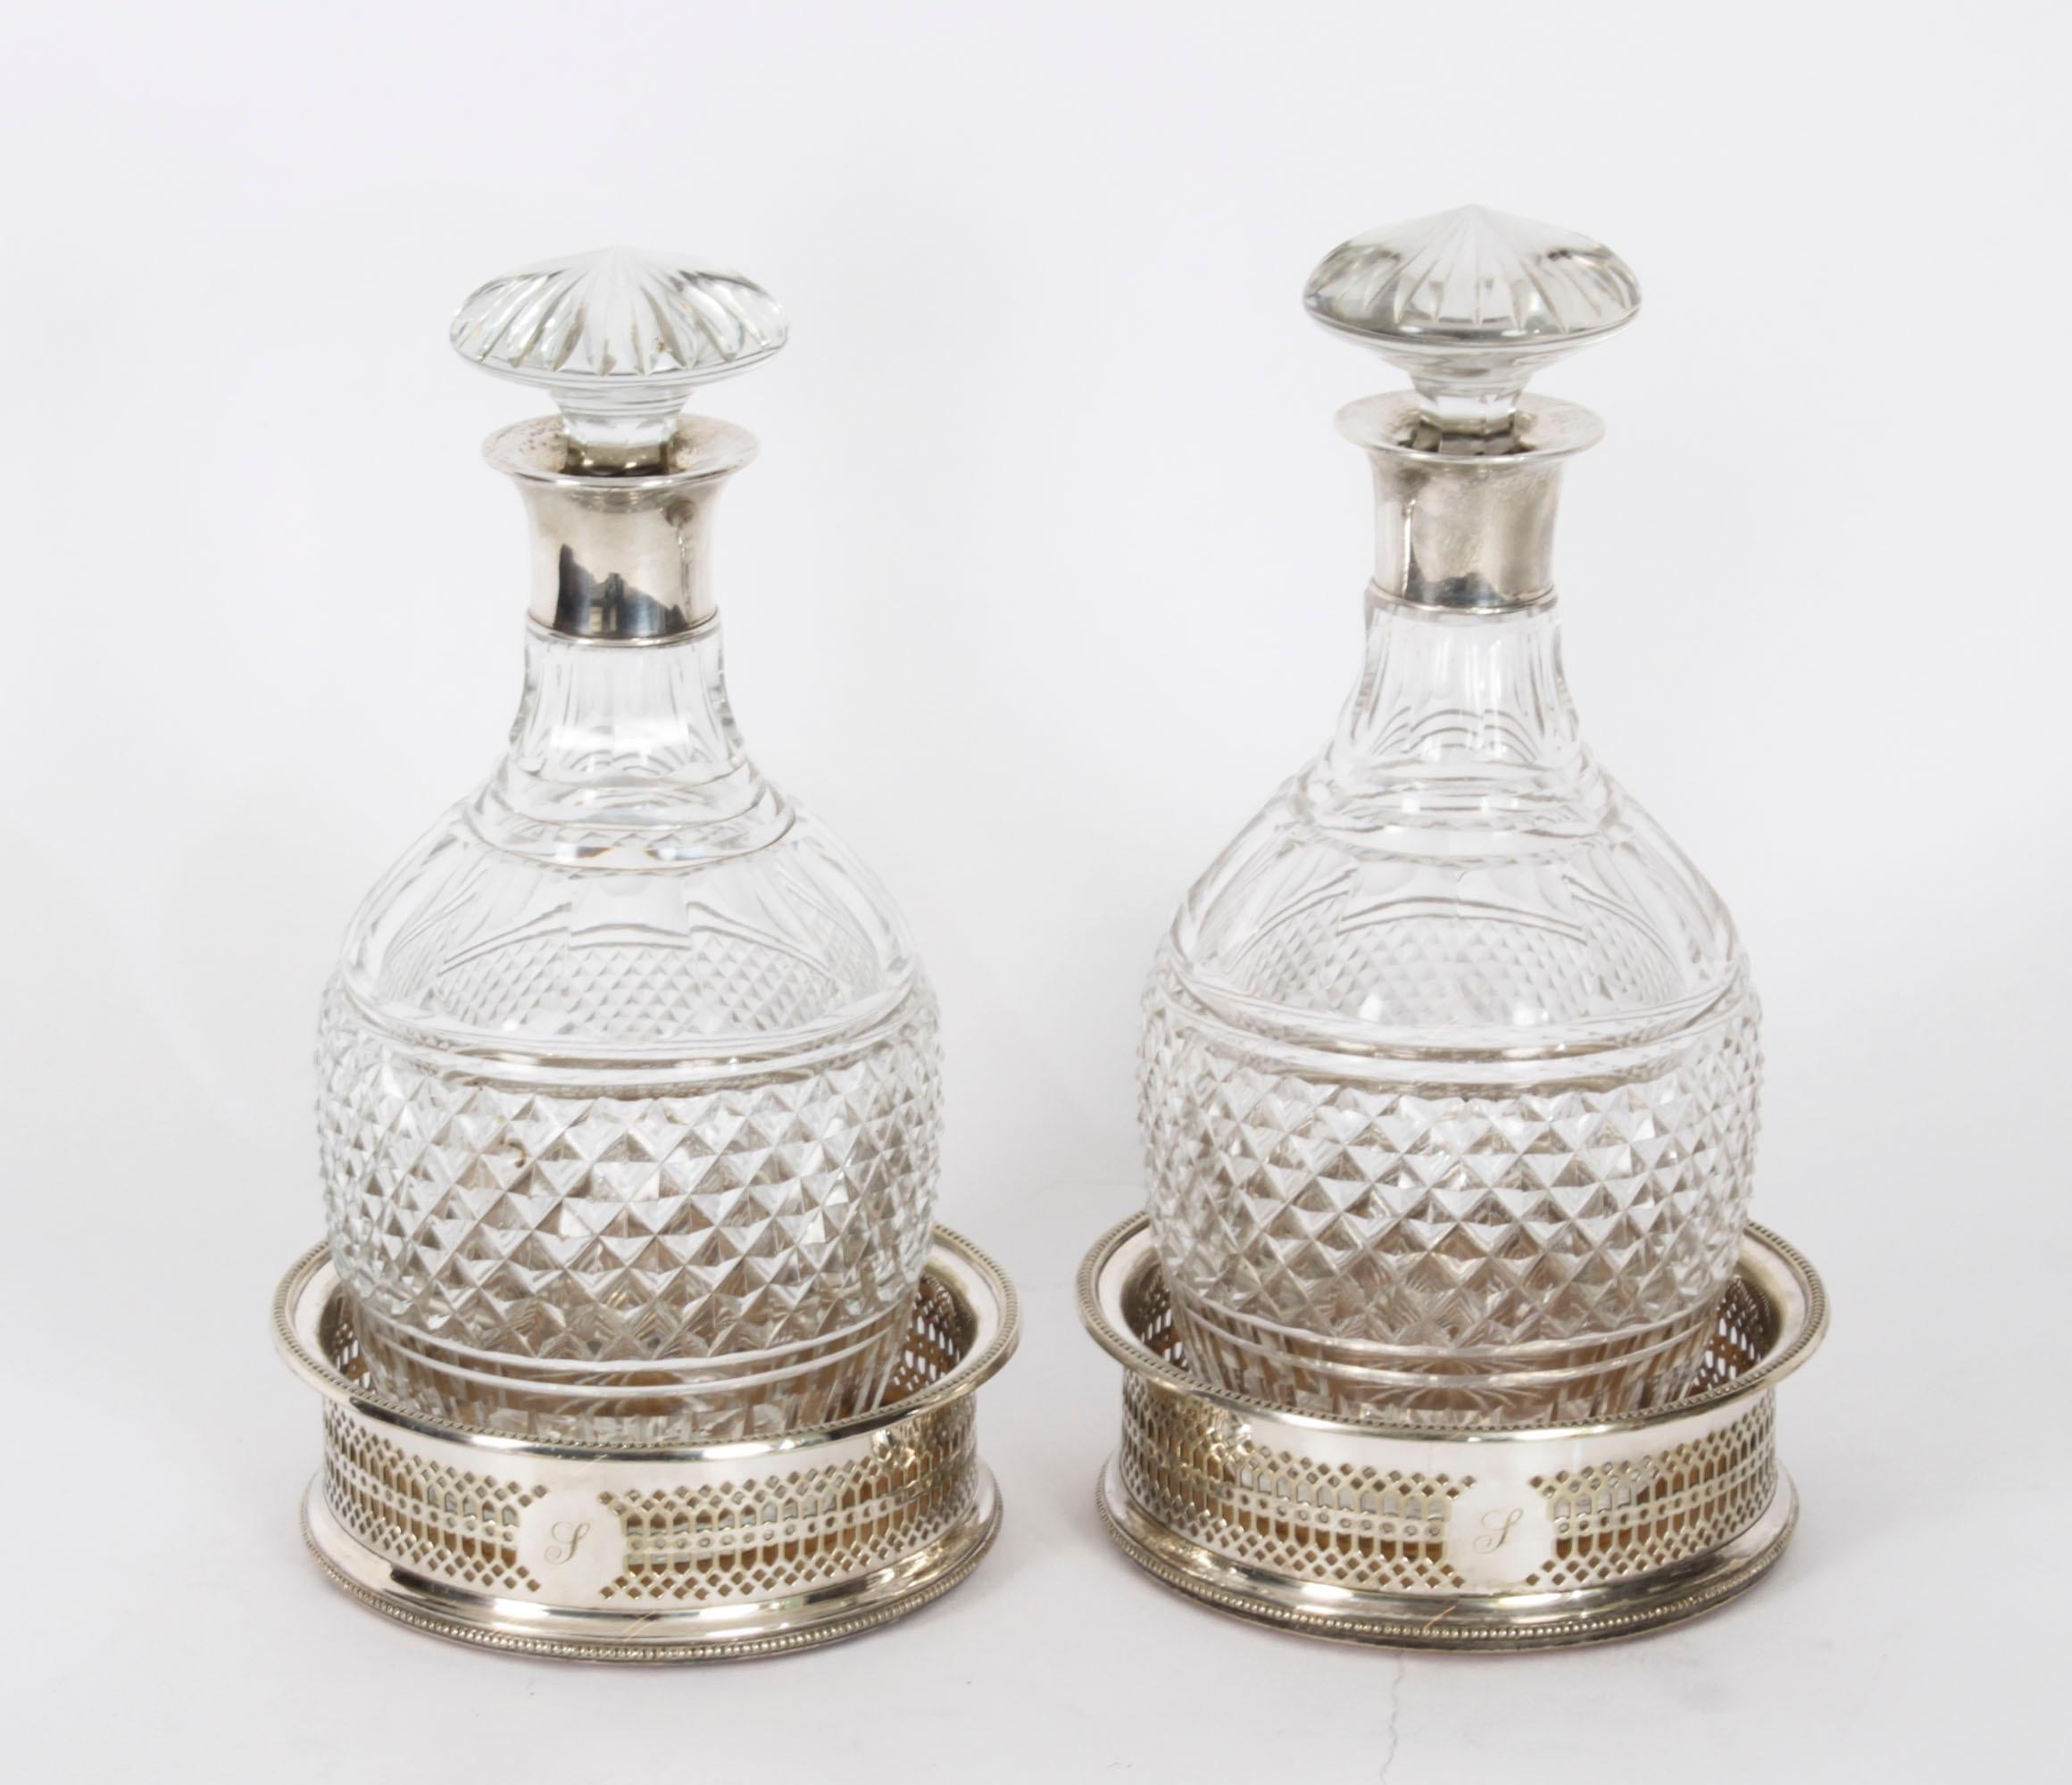 Antique Pair of Cut Crystal Glass Decanters Coaster set 19th Century 17